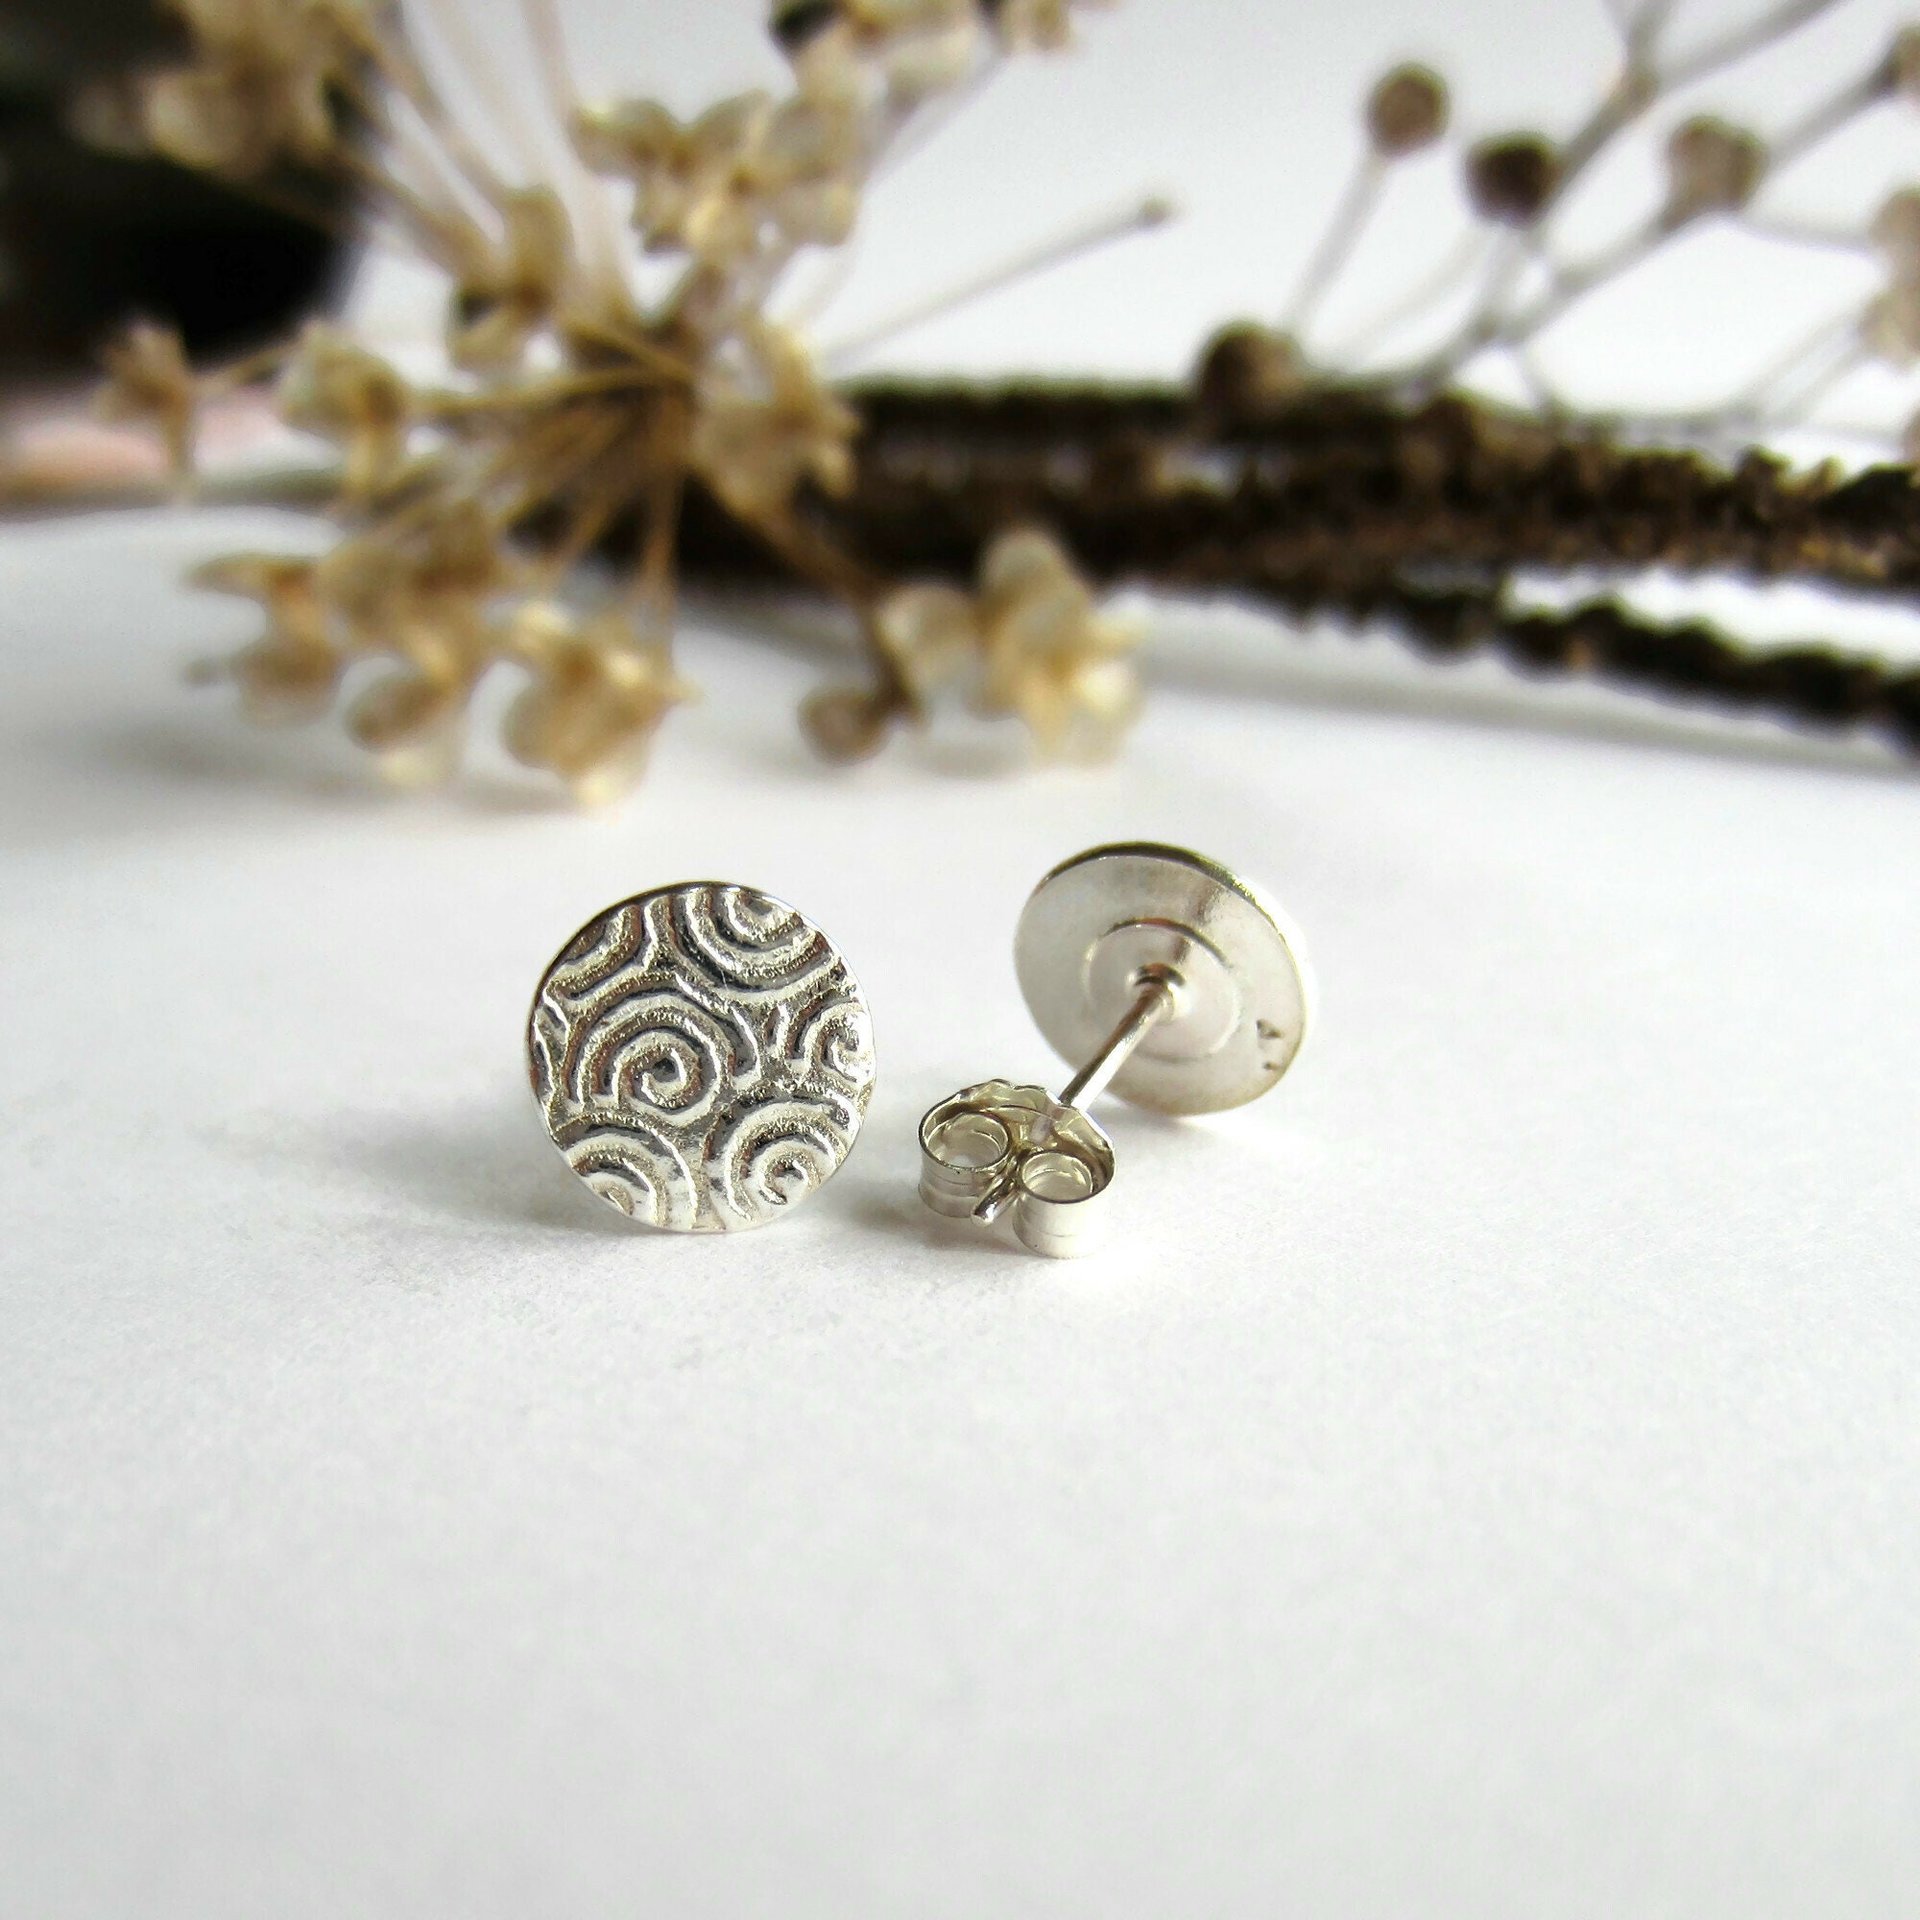 Fine Silver and Sterling Silver Spiral Pattern Textured Stud Earrings ~ Handmade by The Tiny Tree Frog Jewellery